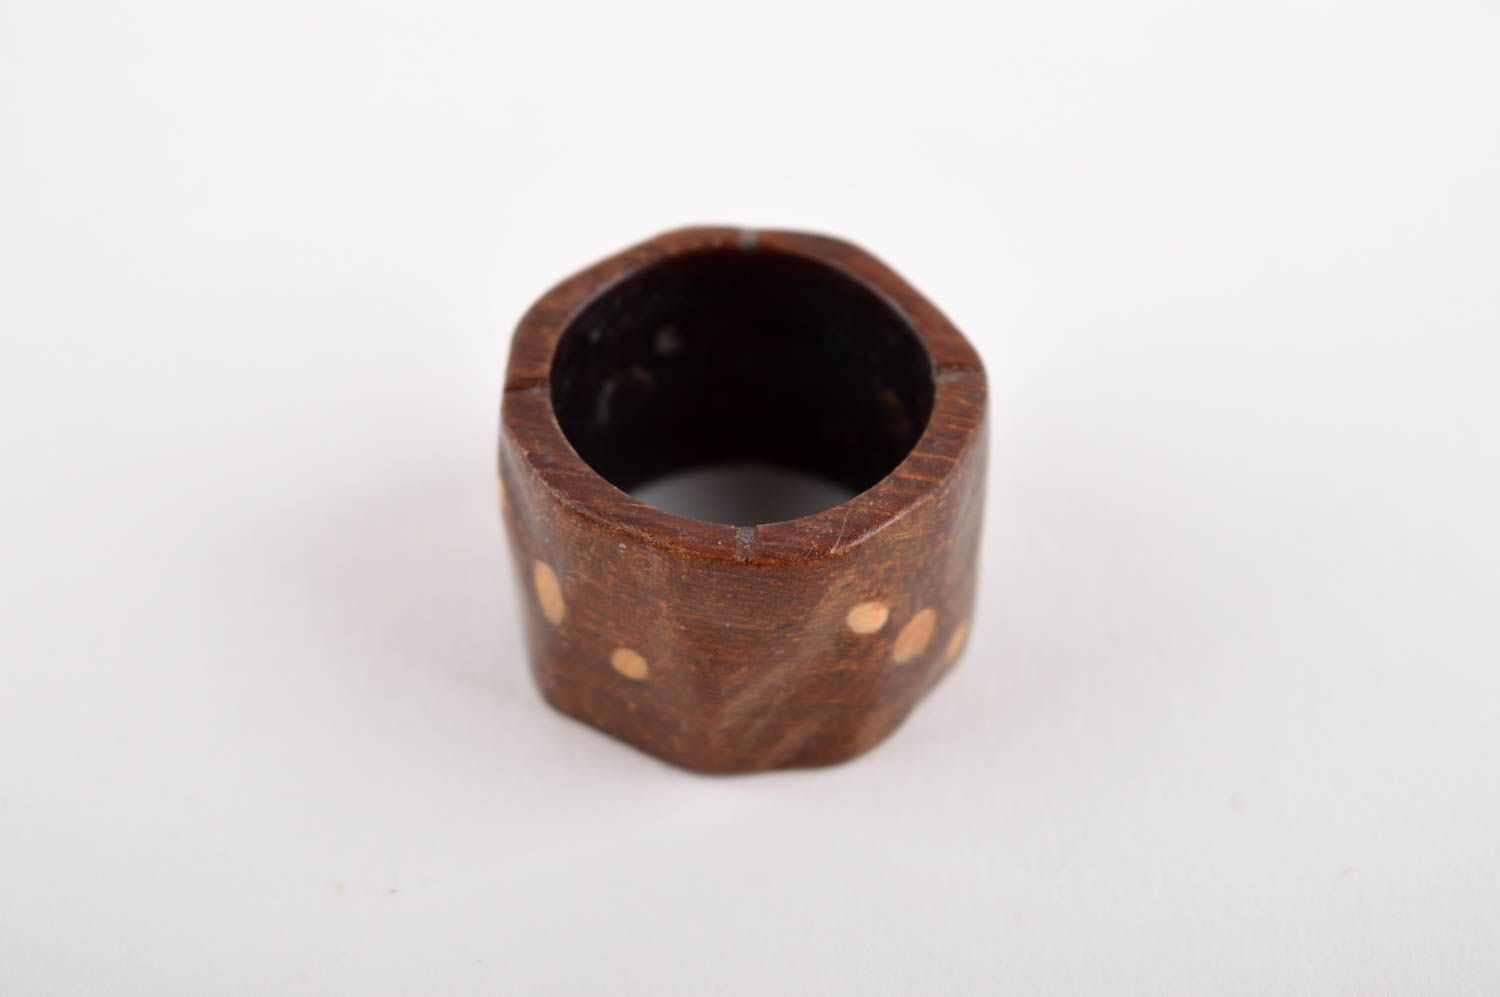 Stylish handmade wooden ring wood craft artisan jewelry designs gifts for her photo 2